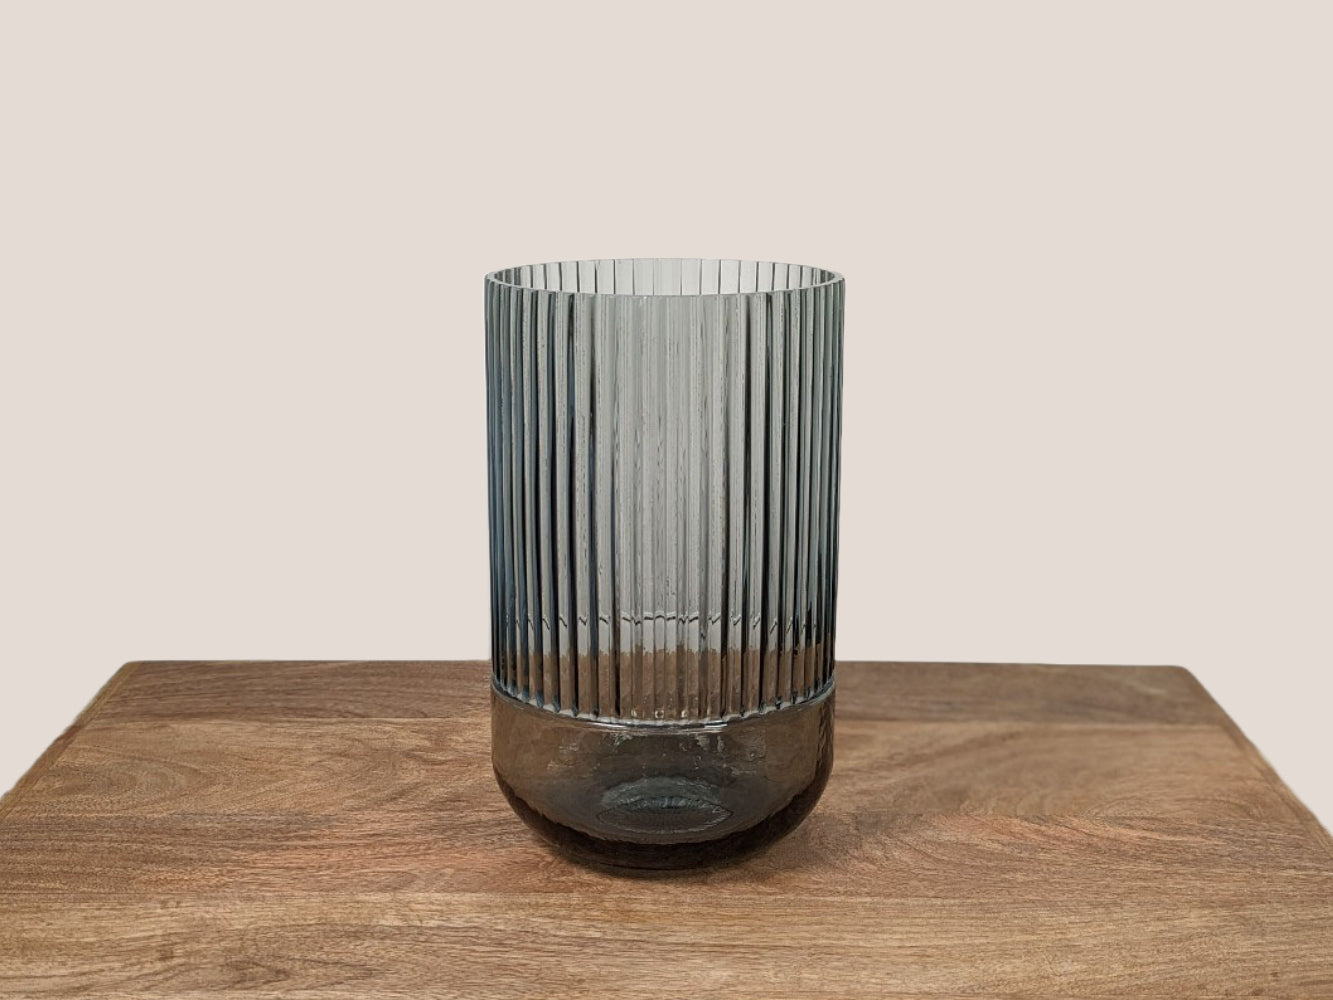 Fluted smokey grey glass vase, 9.5 inches tall. The bottom quarter of the vase is smooth glass while the top three-quarters feature fluted glass. The vase is set against a neutral beige background.